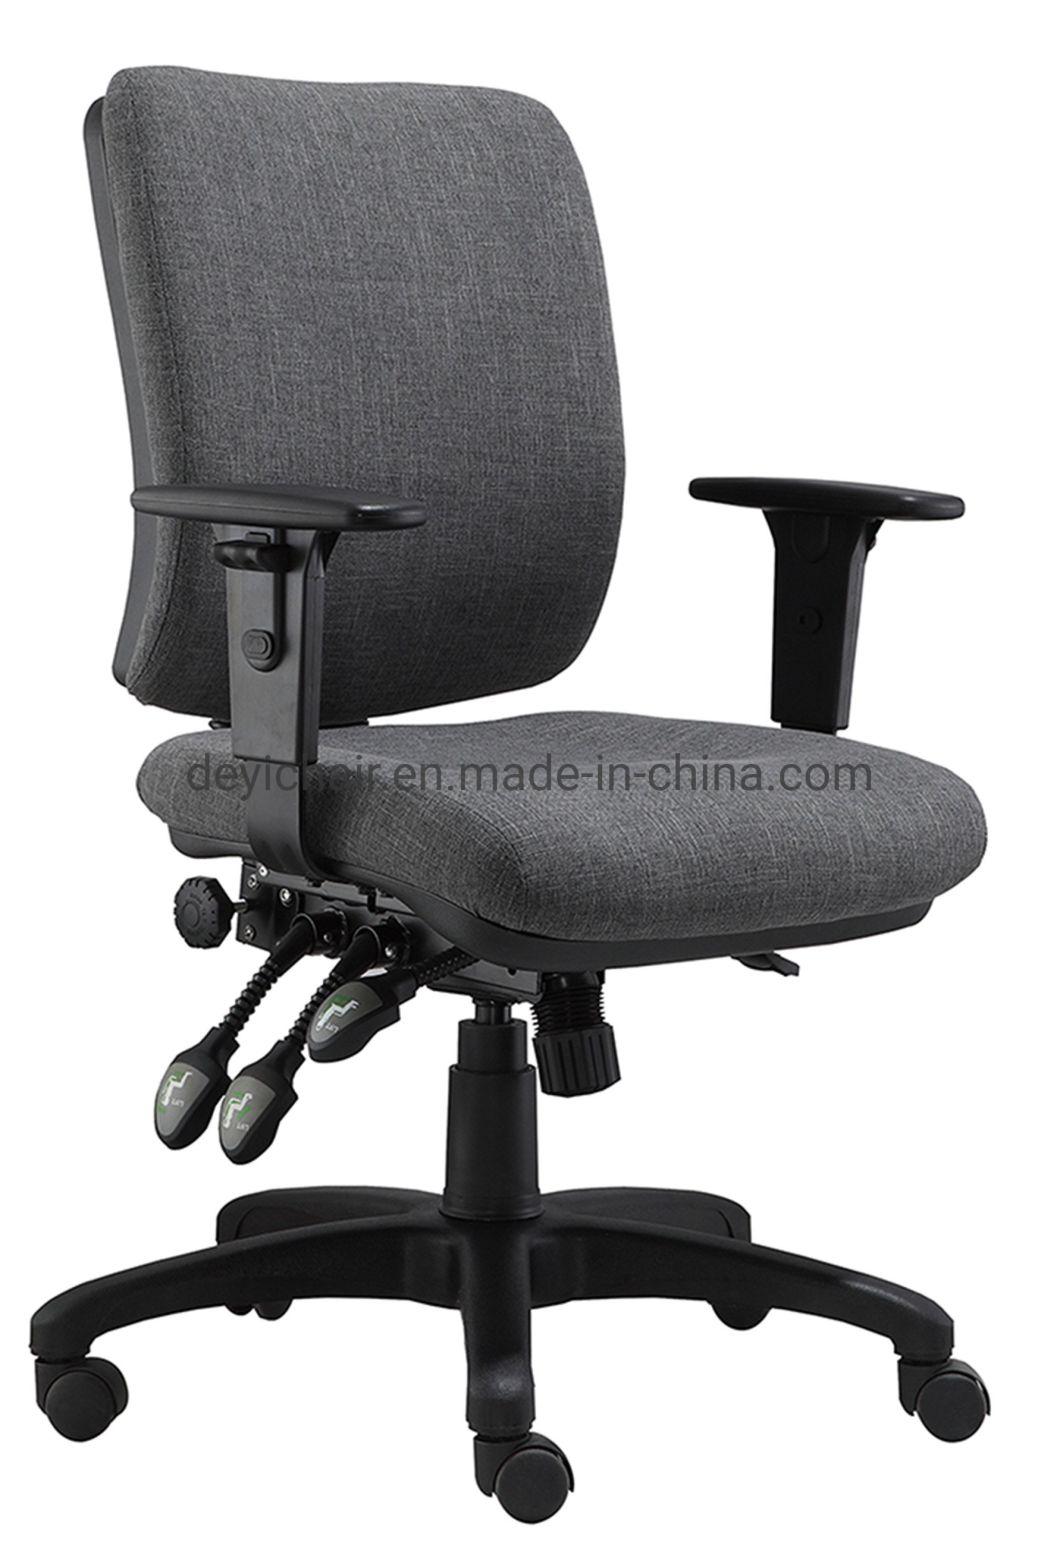 Middle Back Plastic Cover PU Surface Adjustable Arm Fabric Upholstery Functional Computer Office Chair